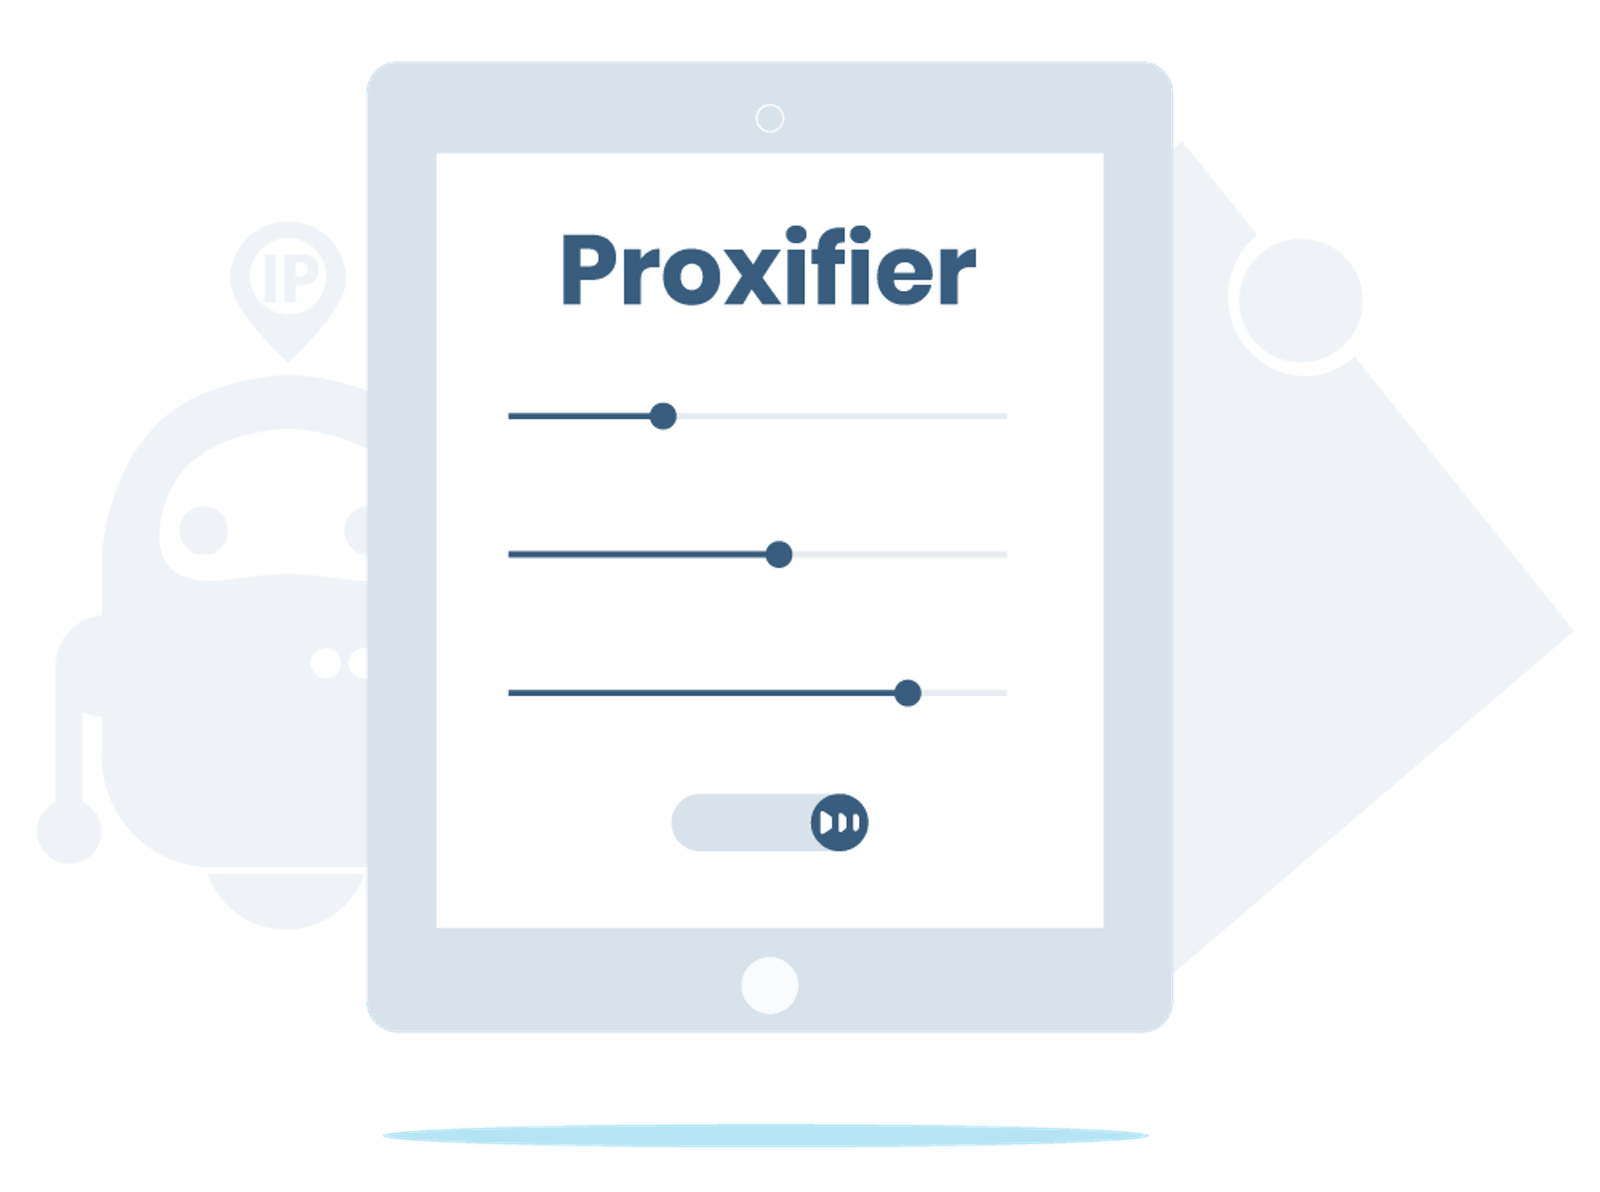 Learn to set up residential proxies with Proxifier.